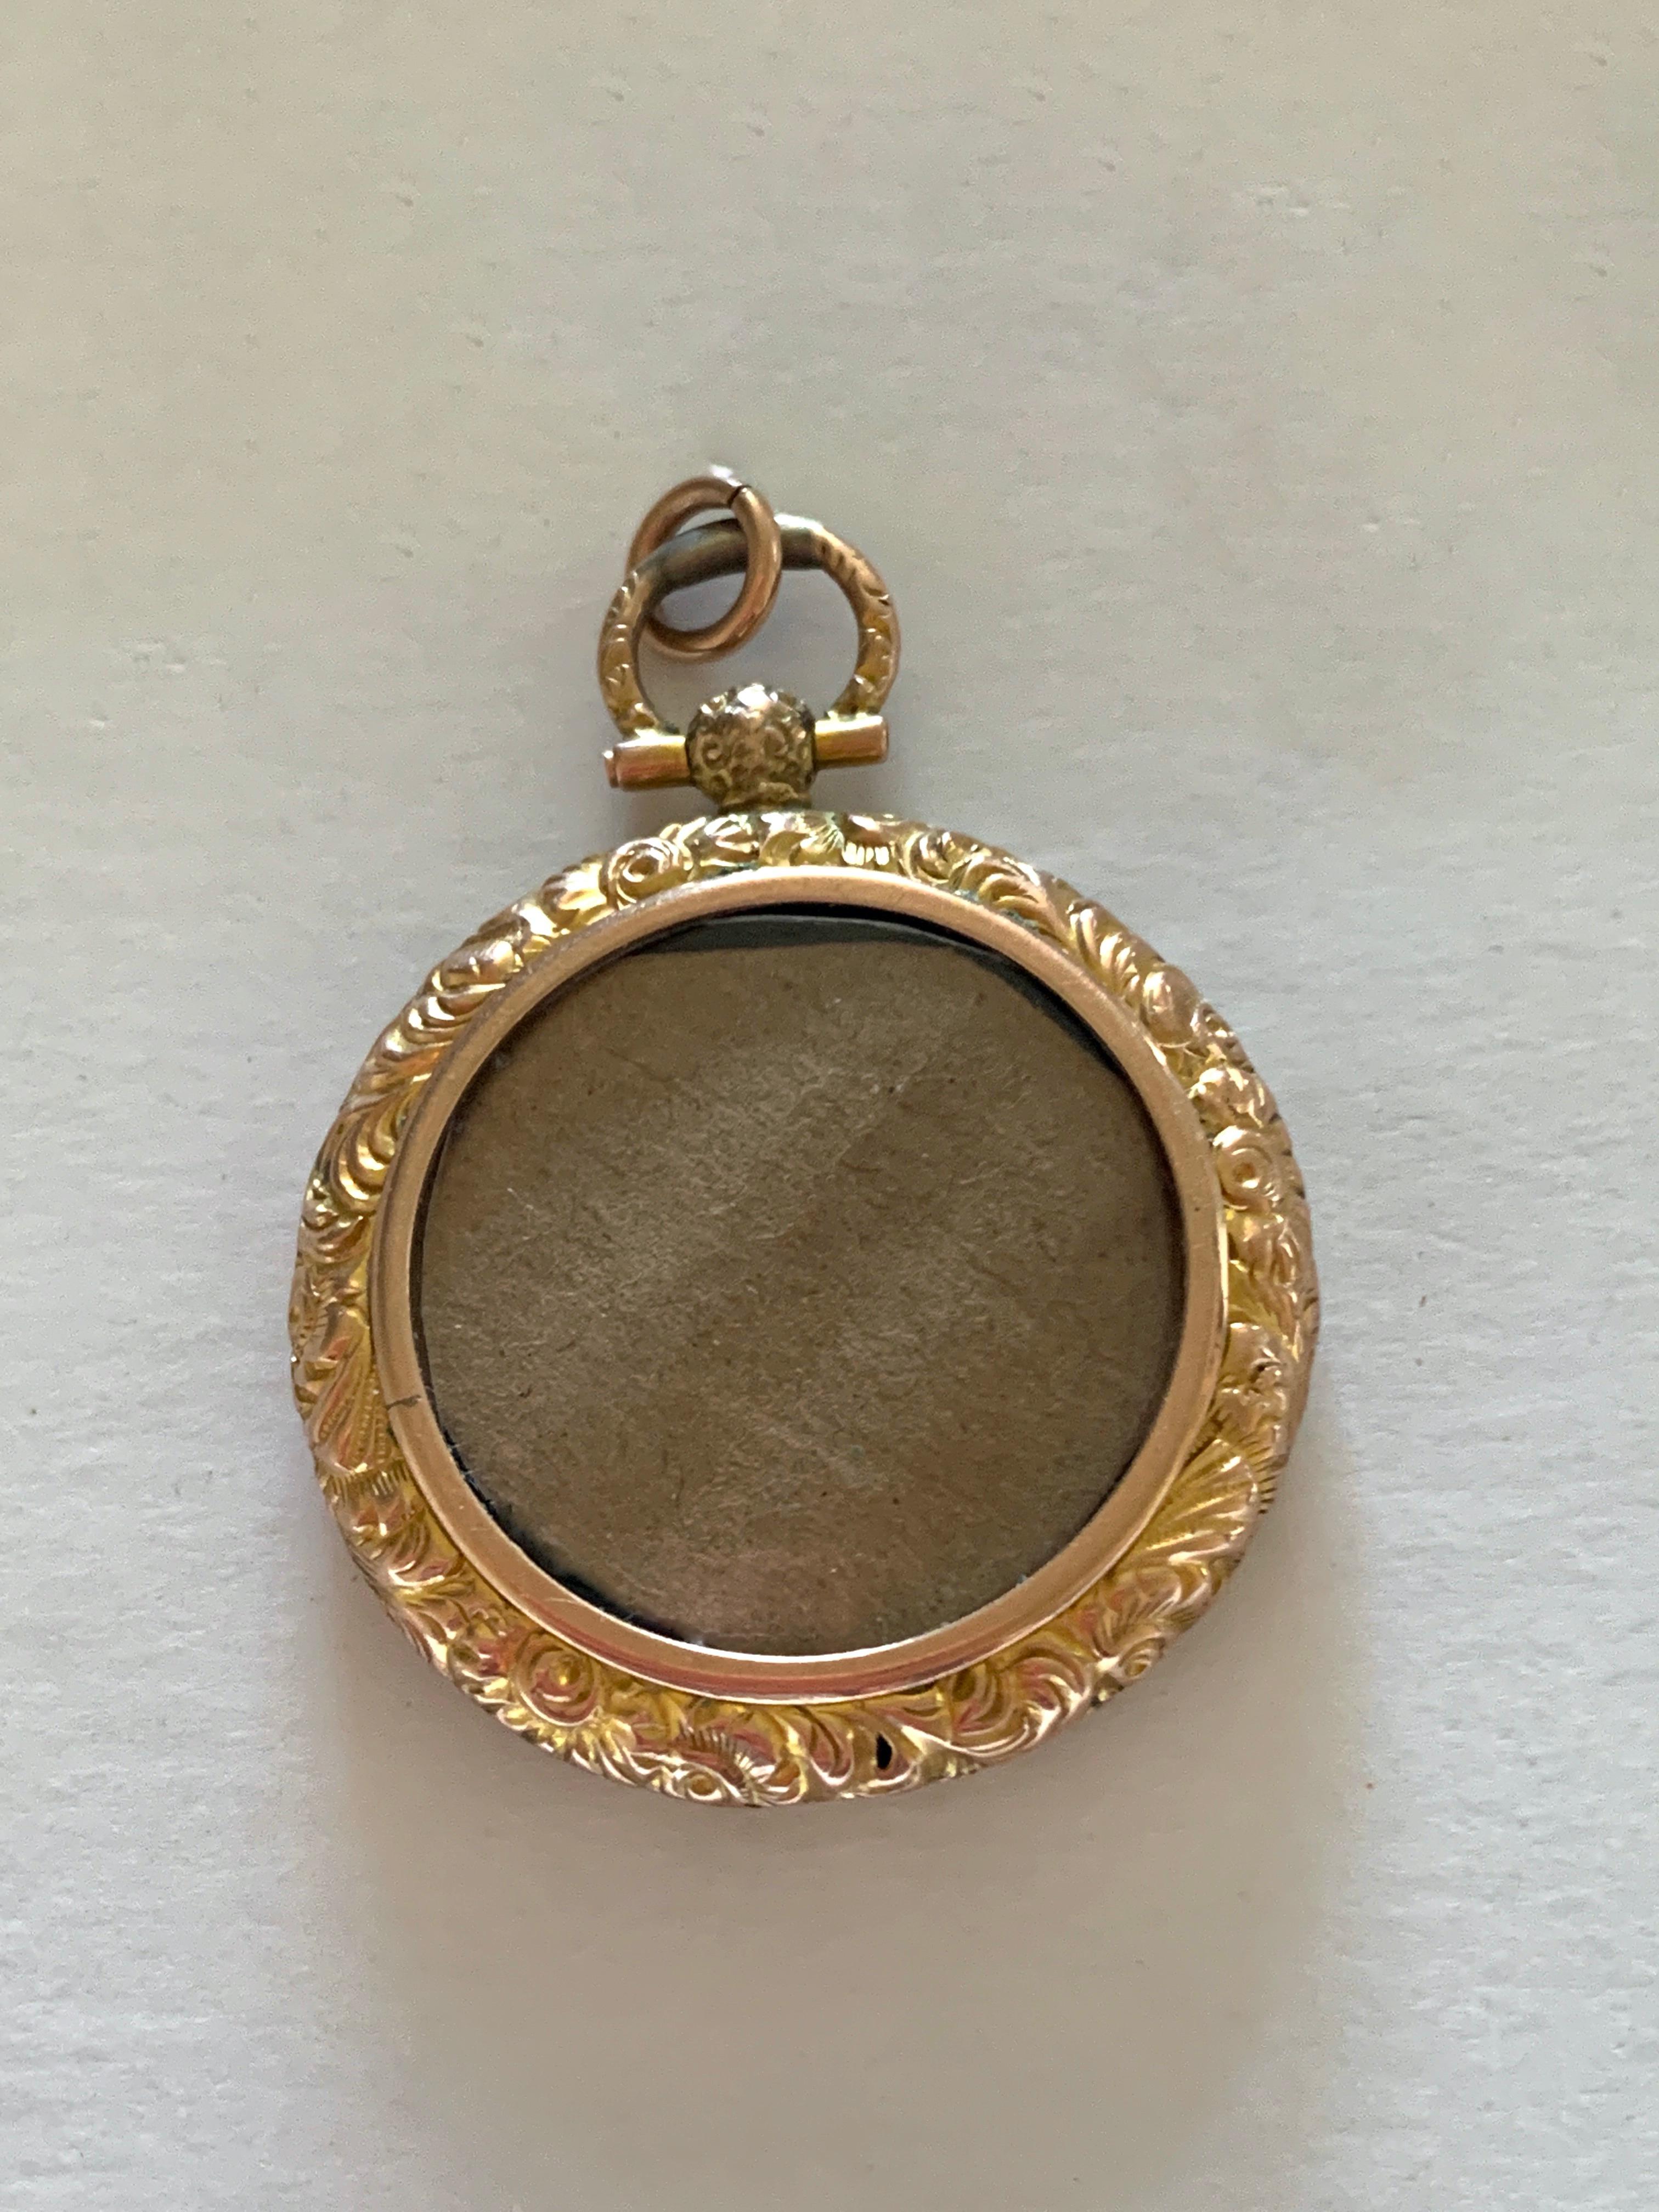 Antique Edwardian 9ct Gold photograph Locket
Fully Hallmarked - Birmingham 1904 9 375
Weight 4.68 grams ( without Inserts )

The locket is holding two perspex windows
hand cut from very fine plastic - modern addition
with a centered piece of